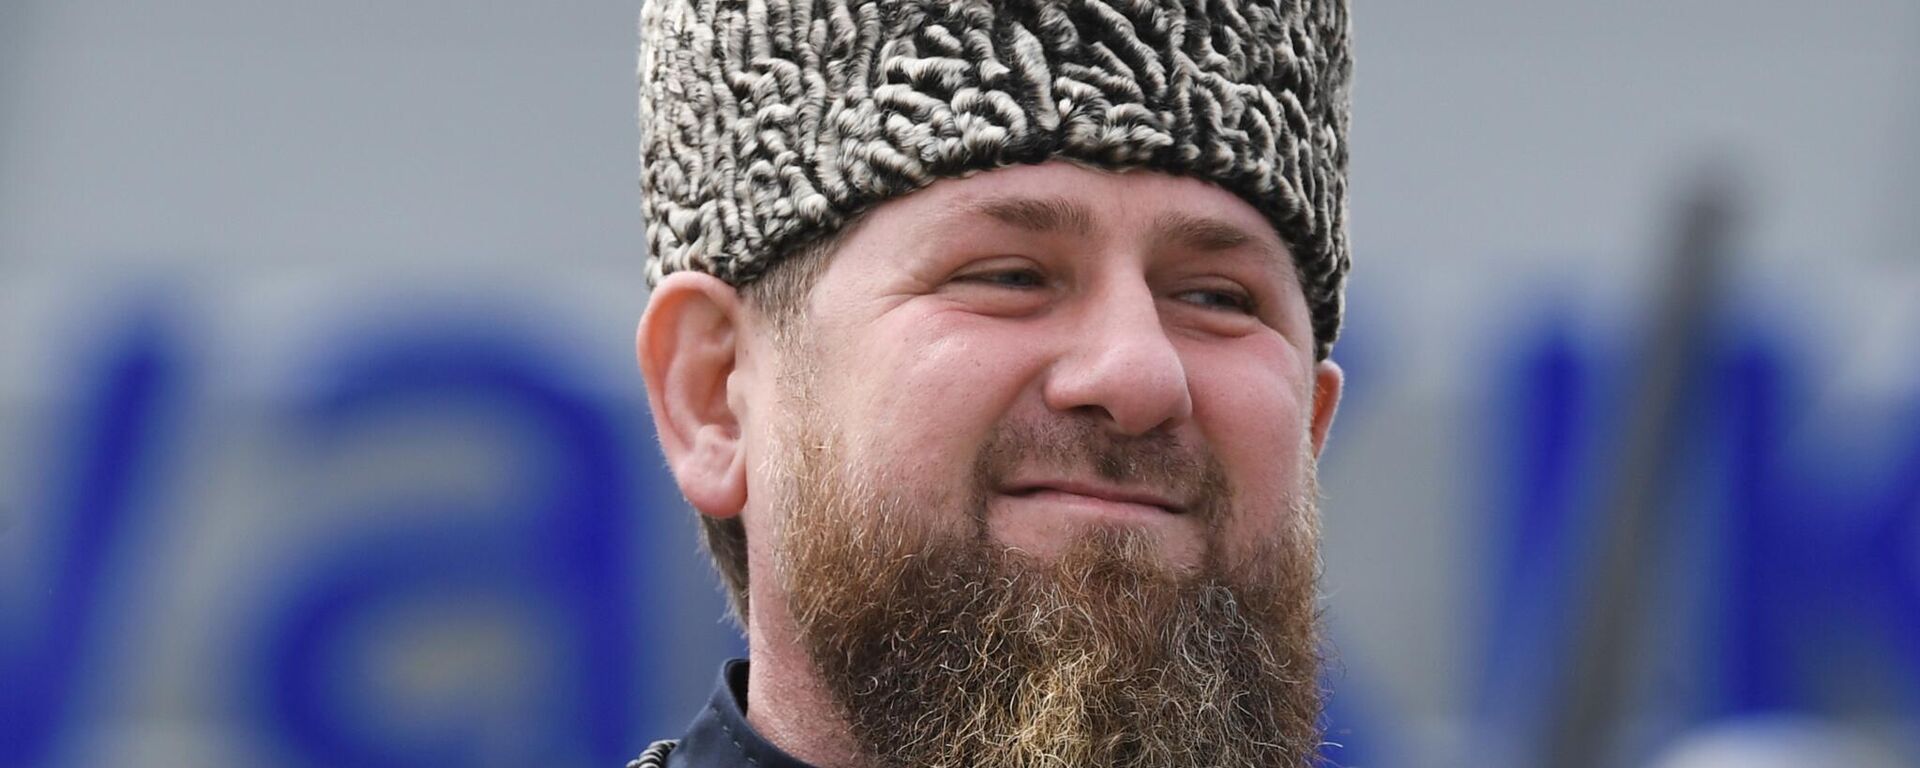 Head of the Chechen Republic Ramzan Kadyrov at a military parade dedicated to the 77th anniversary of victory in the Great Patriotic War in Grozny. - Sputnik International, 1920, 23.05.2022